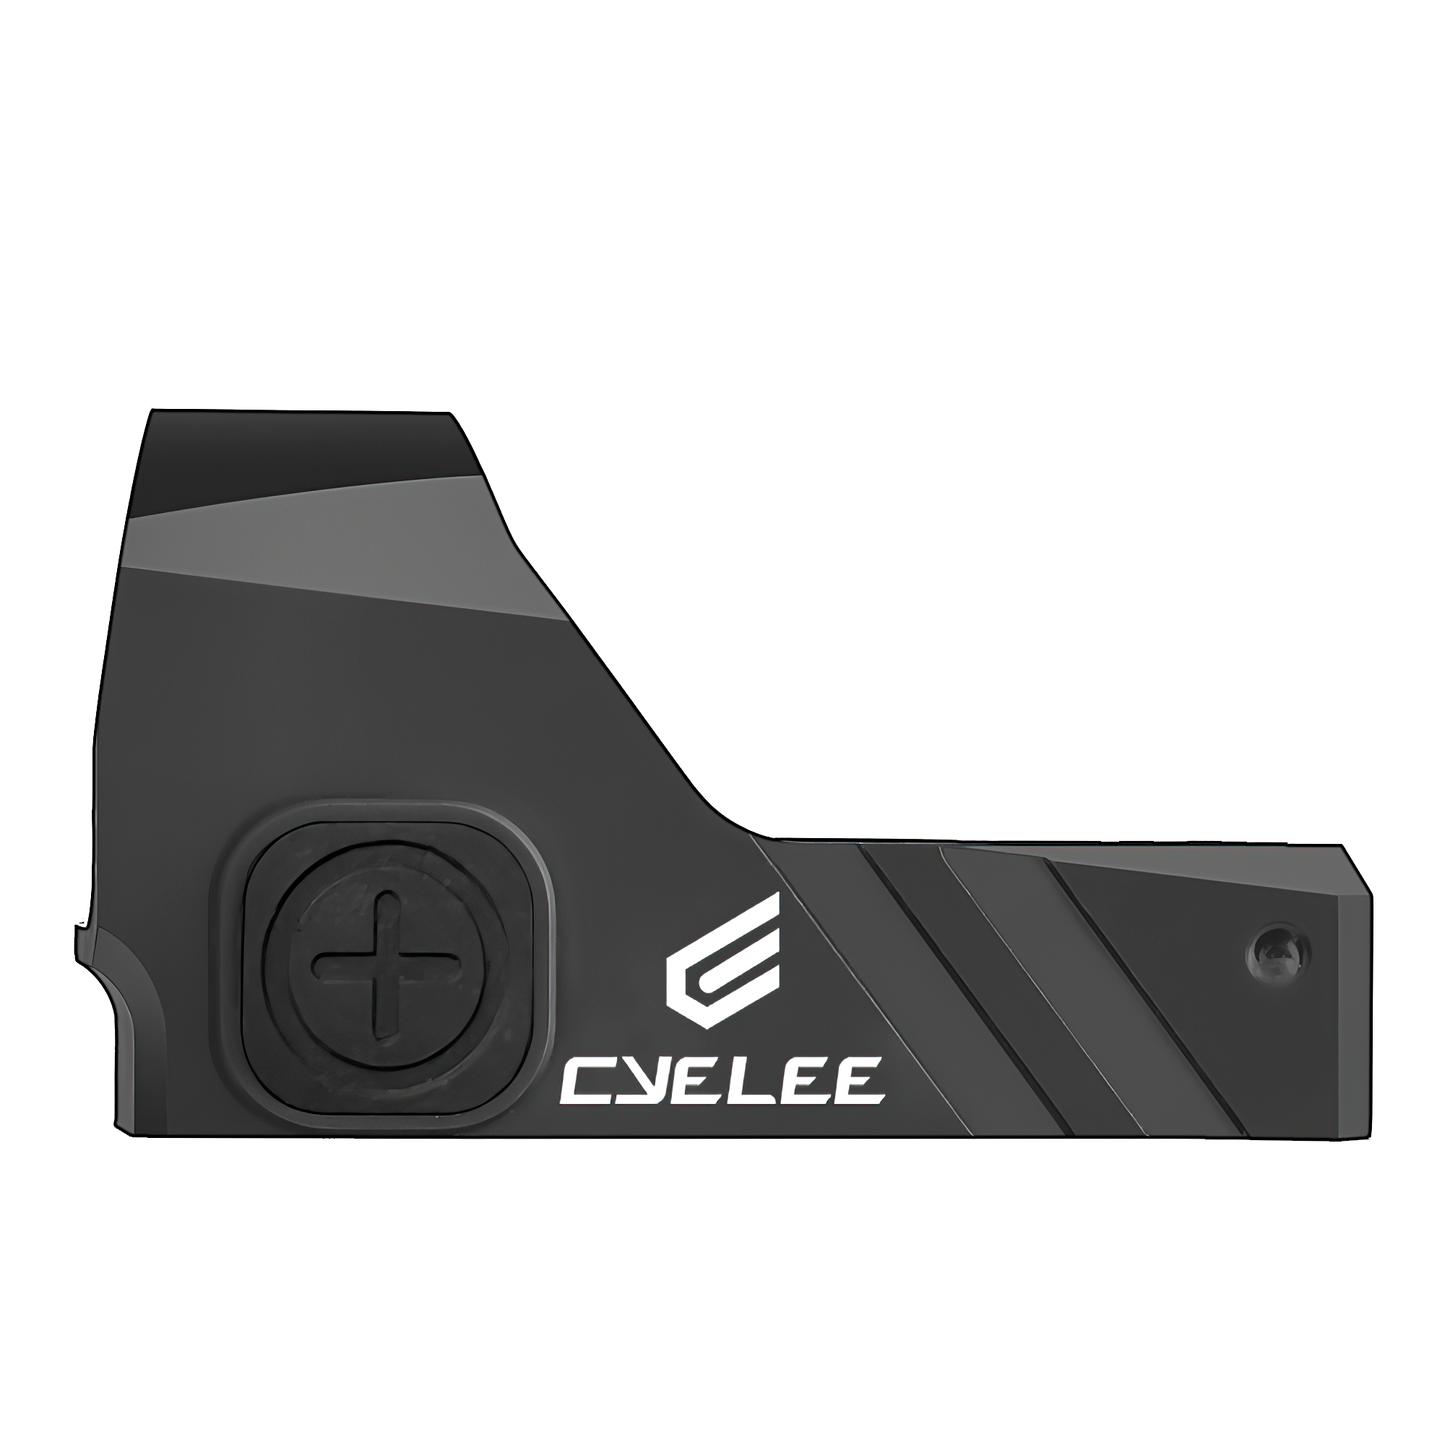 Cyelee WOLF2 STIG-RS (Astigmatism Relief) RED Circle Dot Sight, for RMR Footprint, 3MOA Dot and 64MOA Ring Reticle